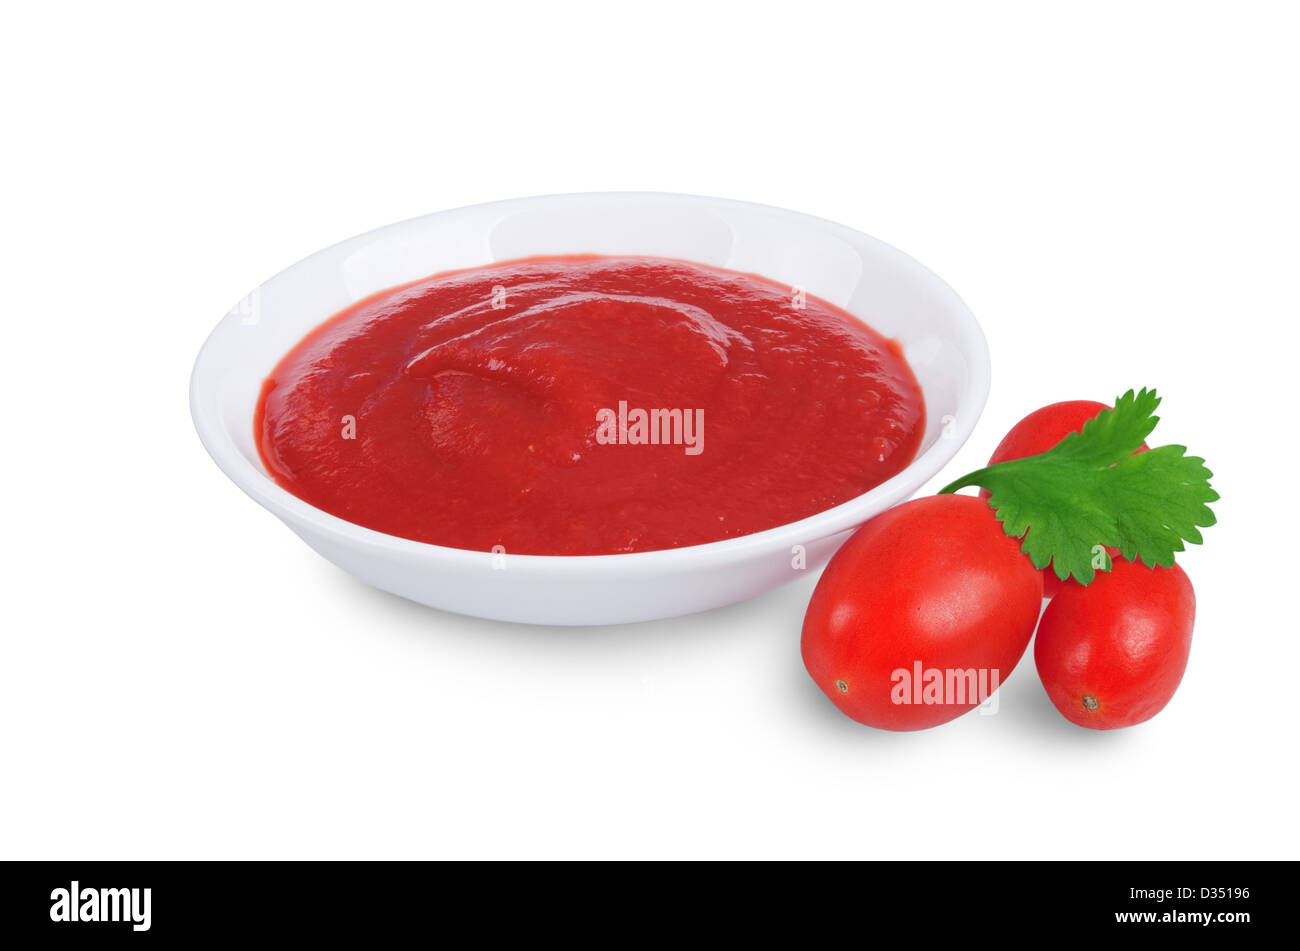 tomato sauce ketchup in bowl isolated on white background Stock Photo